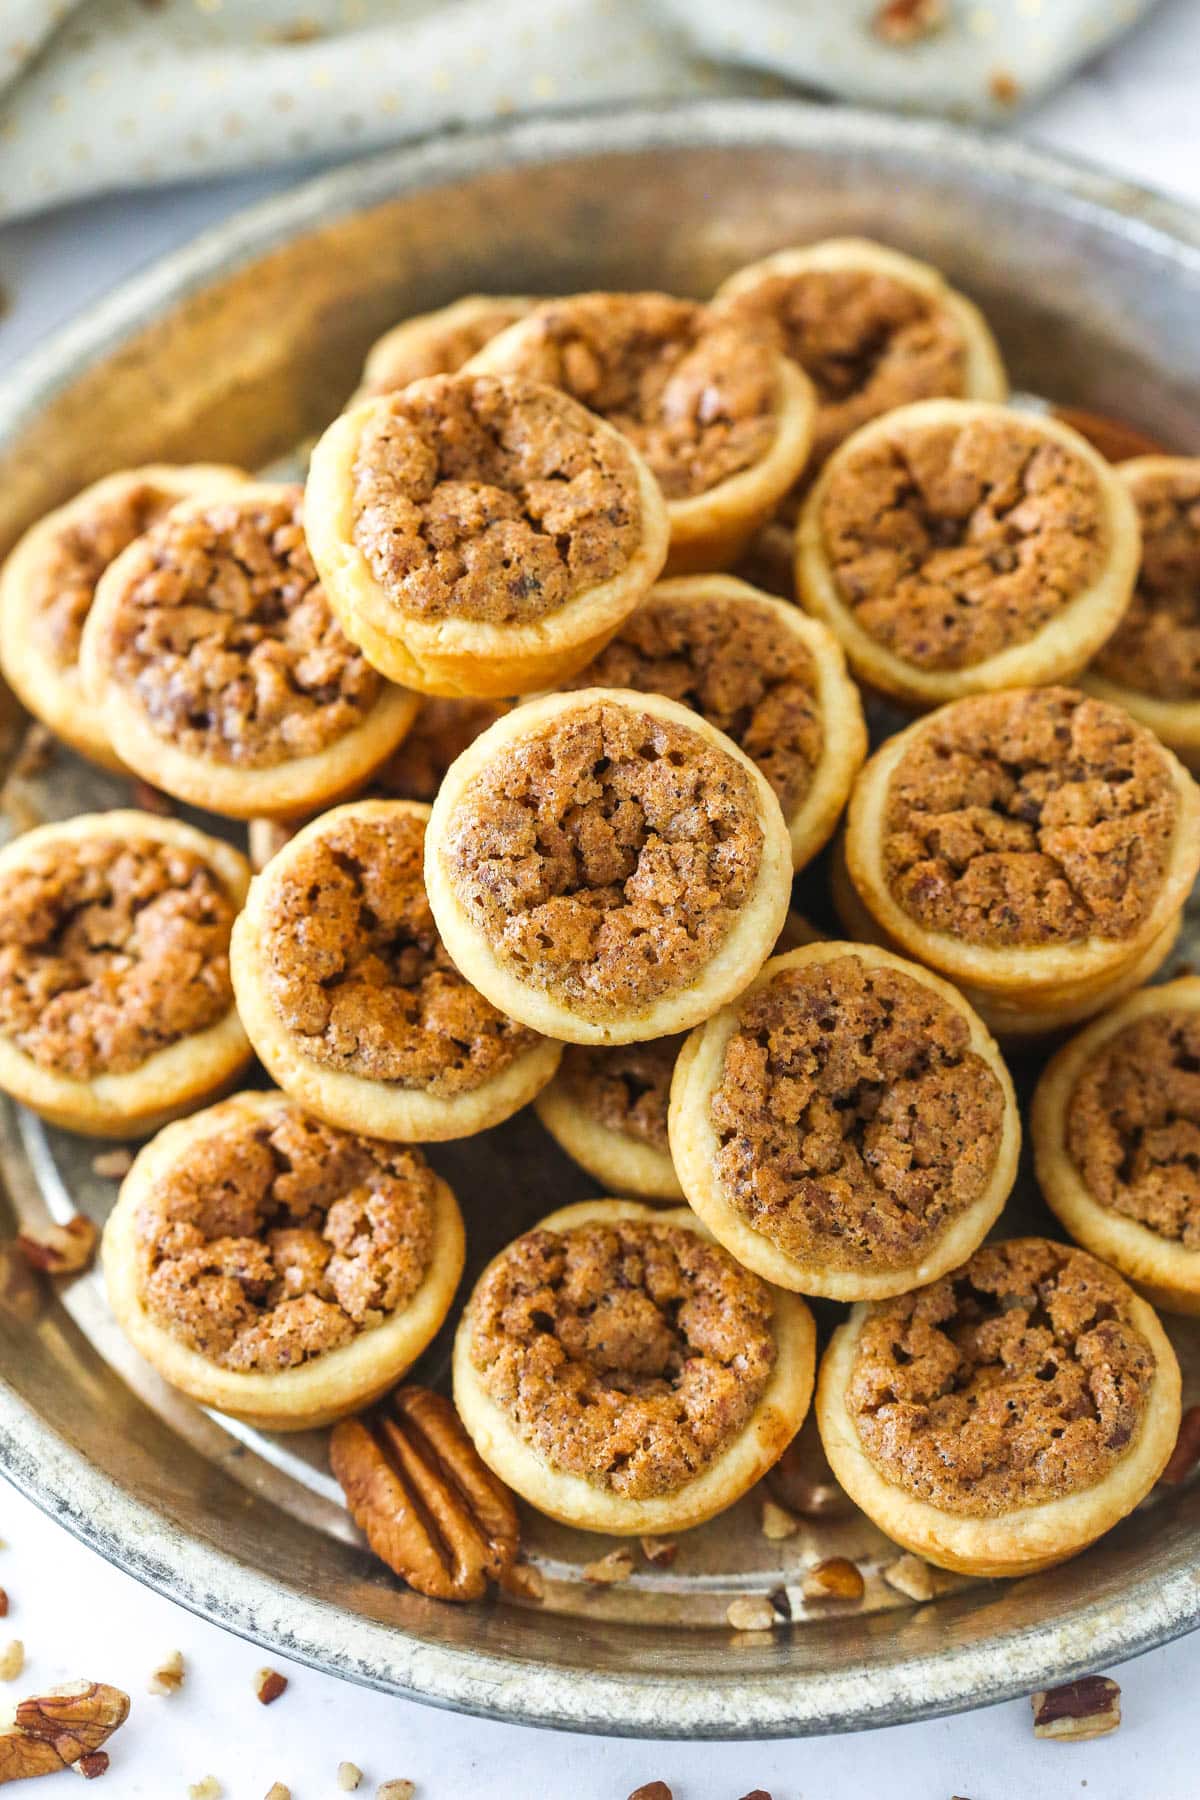 Phyllo pastry cups filled with traditional pecan pie. Take pecan